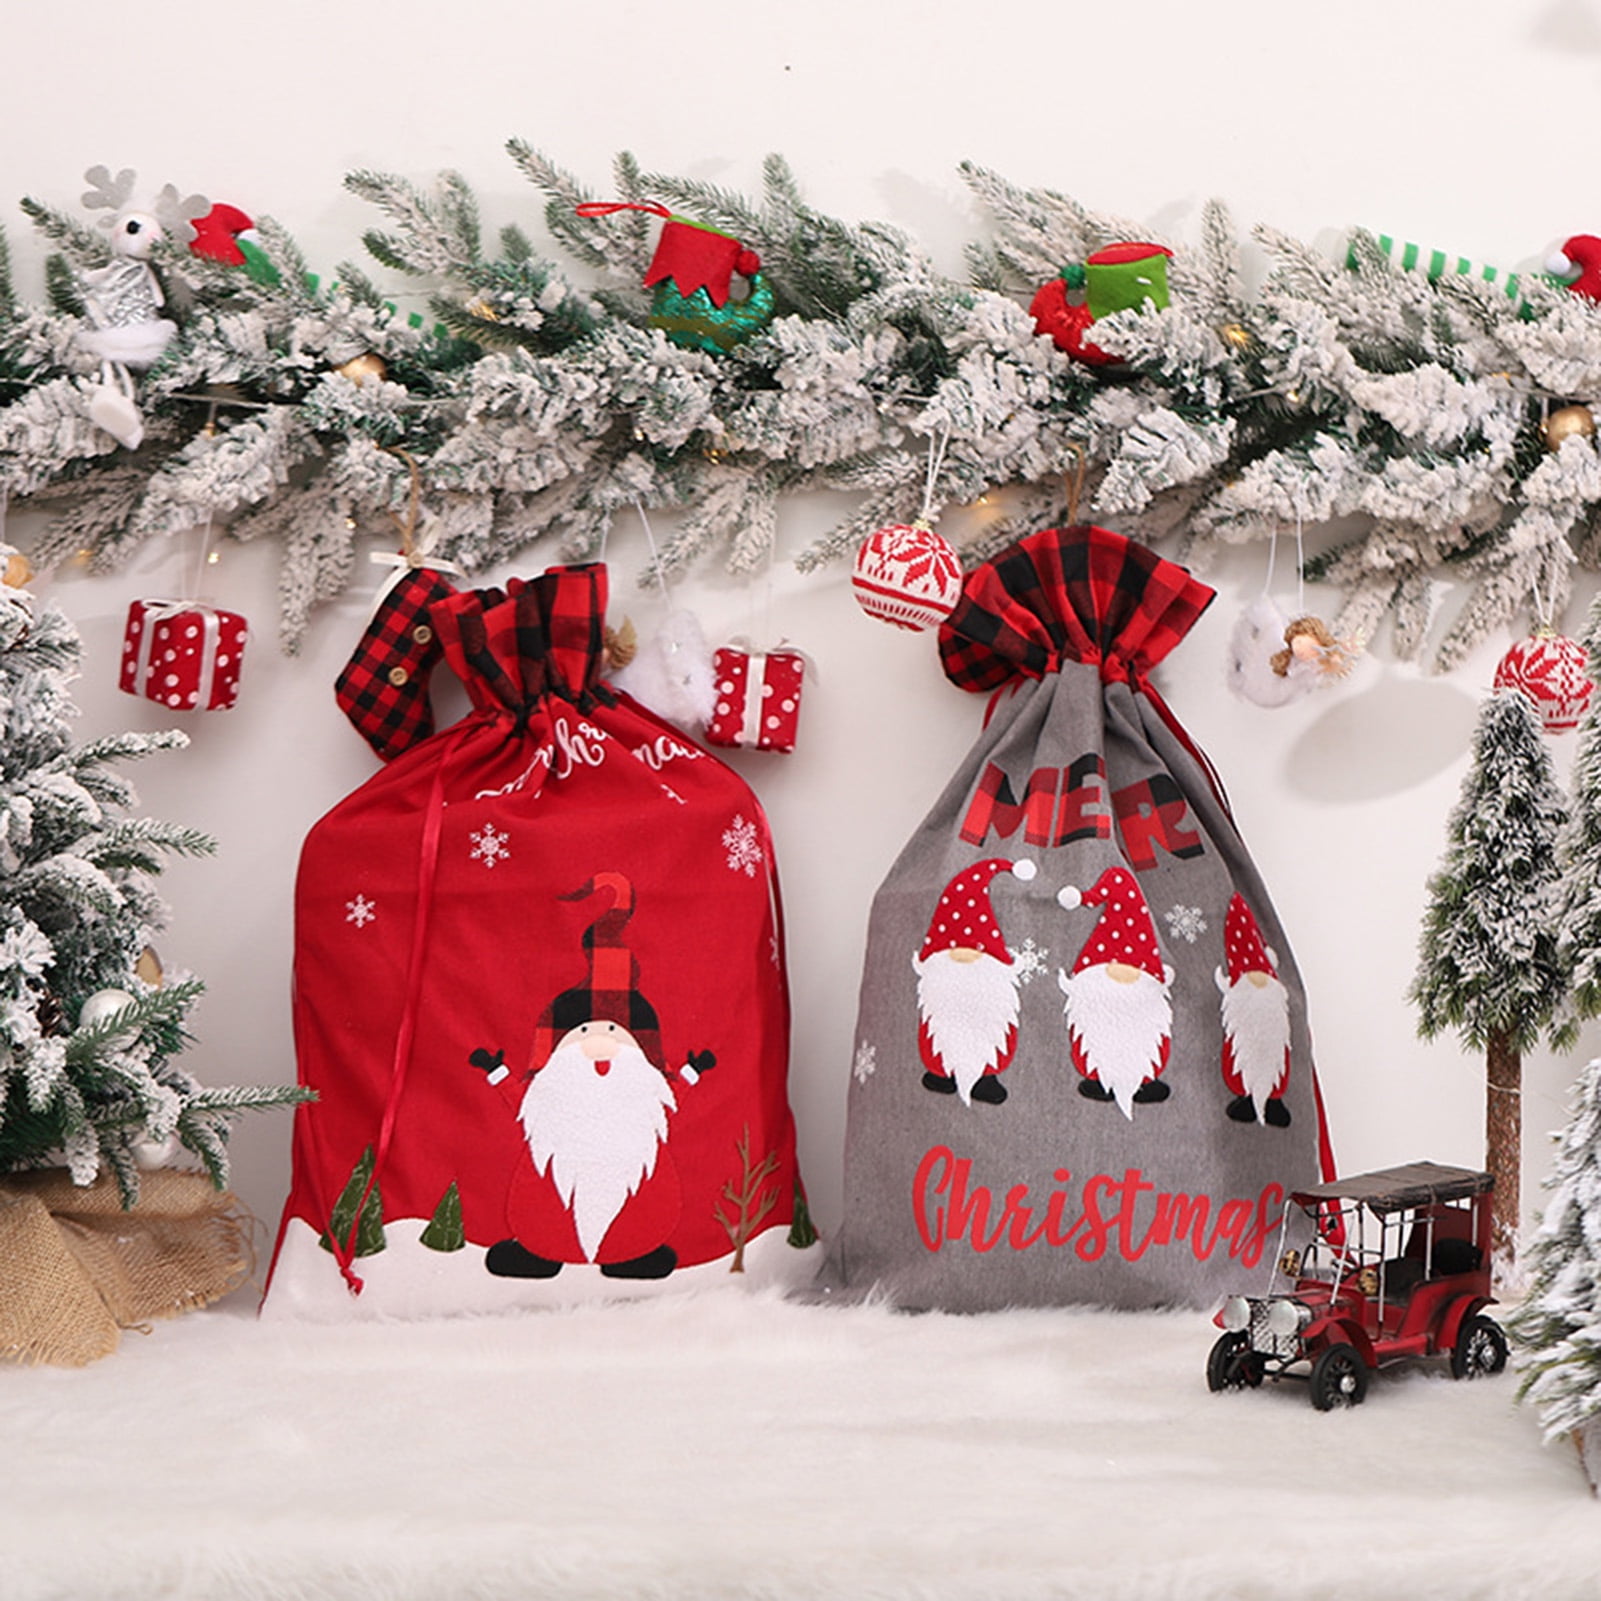 10 Pieces Christmas Gift Drawstring Large Bags 15.7 x 13.7 Inch Christmas Wrapping Backpack with Drawstring Christmas Drawstring Goody Treat Bags Xmas Santa Backpack for Christmas Party Favor Supplies 